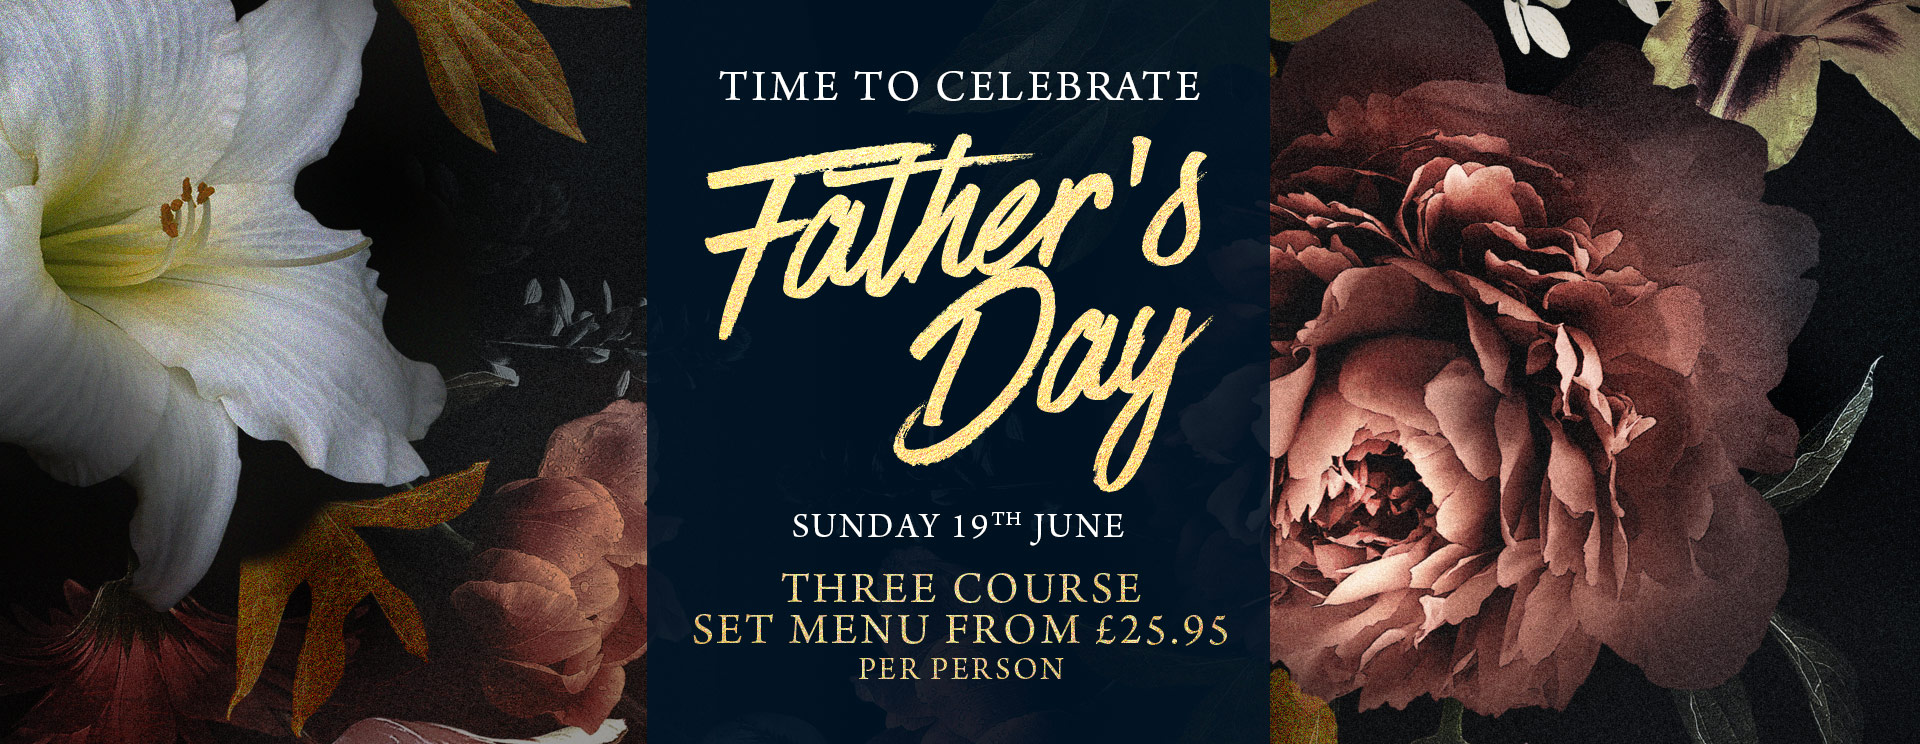 Fathers Day at The Bathampton Mill